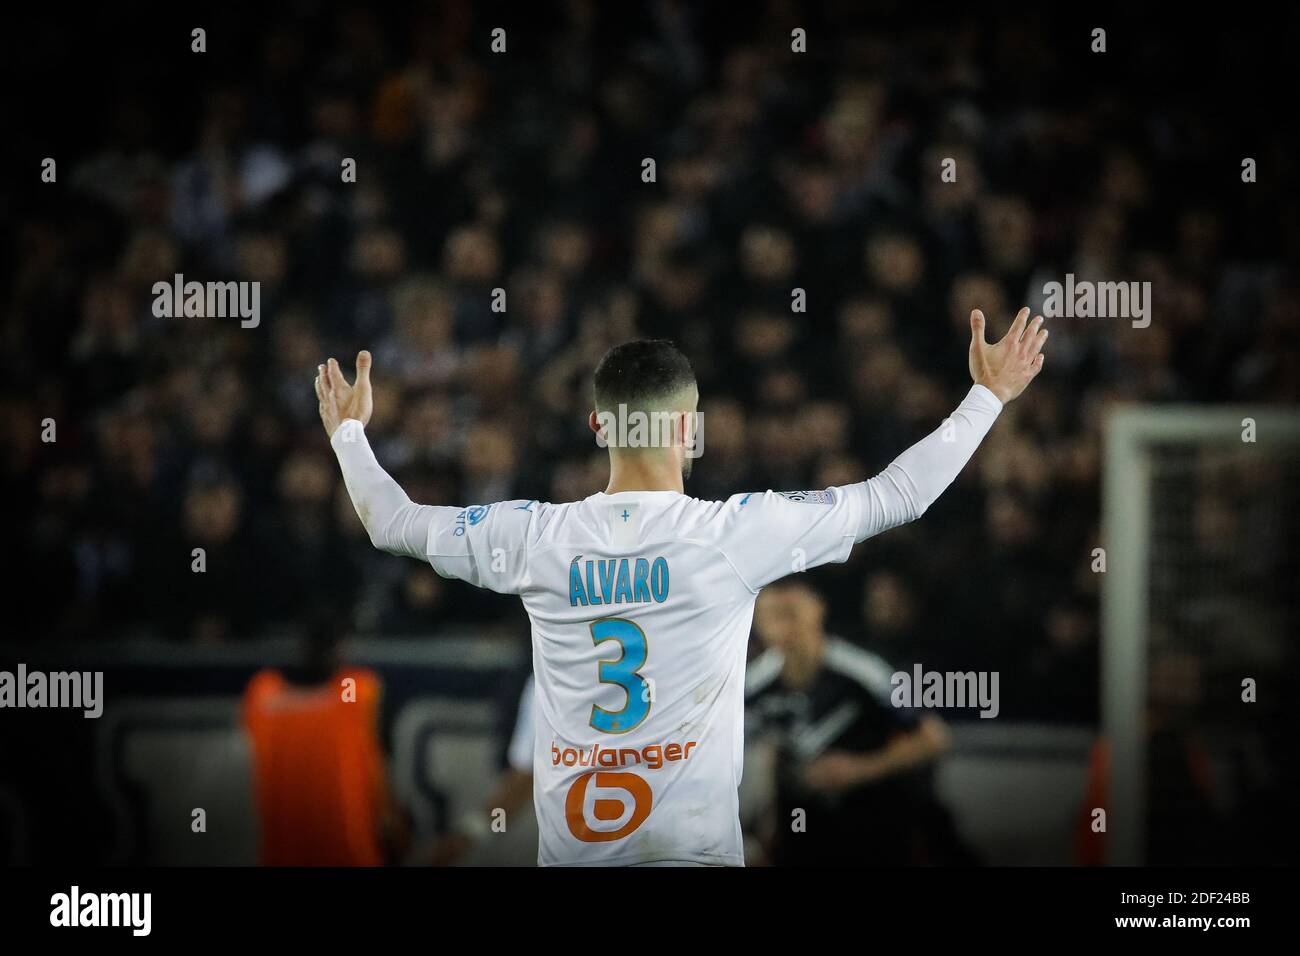 Alvaro Gonzalez during the French L1 football match between Girondins de Bordeaux and Olympique of Marseille. In Bordeaux , France on February 02, 2020. Photo by Thibaud Moritz/ABACAPRESS.COM Stock Photo